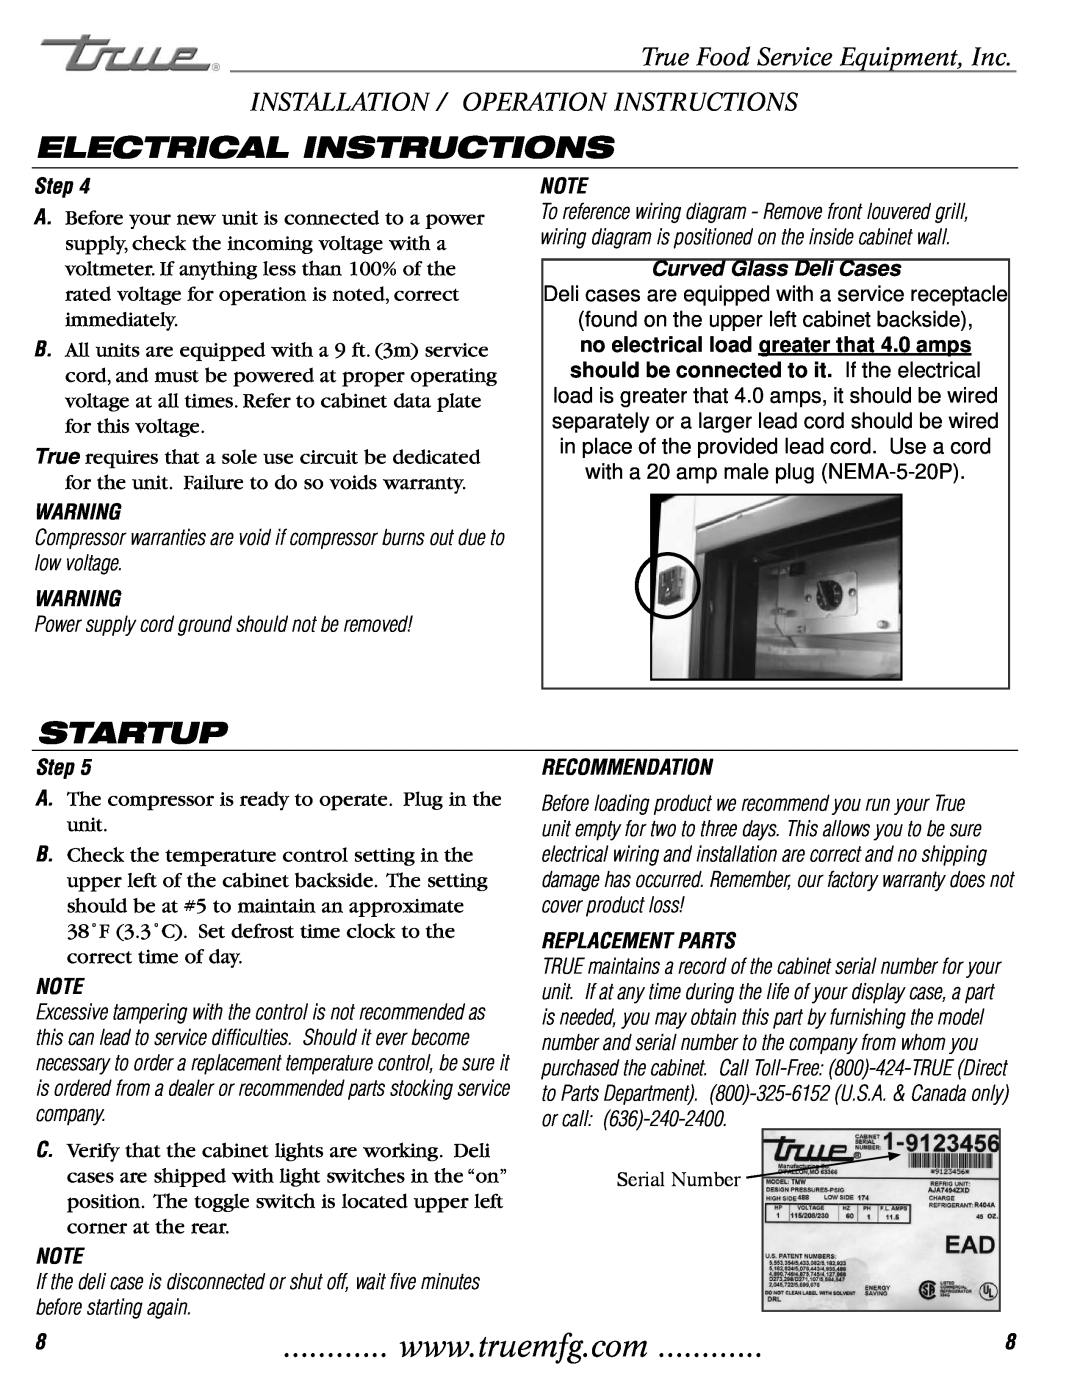 True Manufacturing Company TCGG-72-S, TCGG-48-S Electrical Instructions, Startup, True Food Service Equipment, Inc, Step 